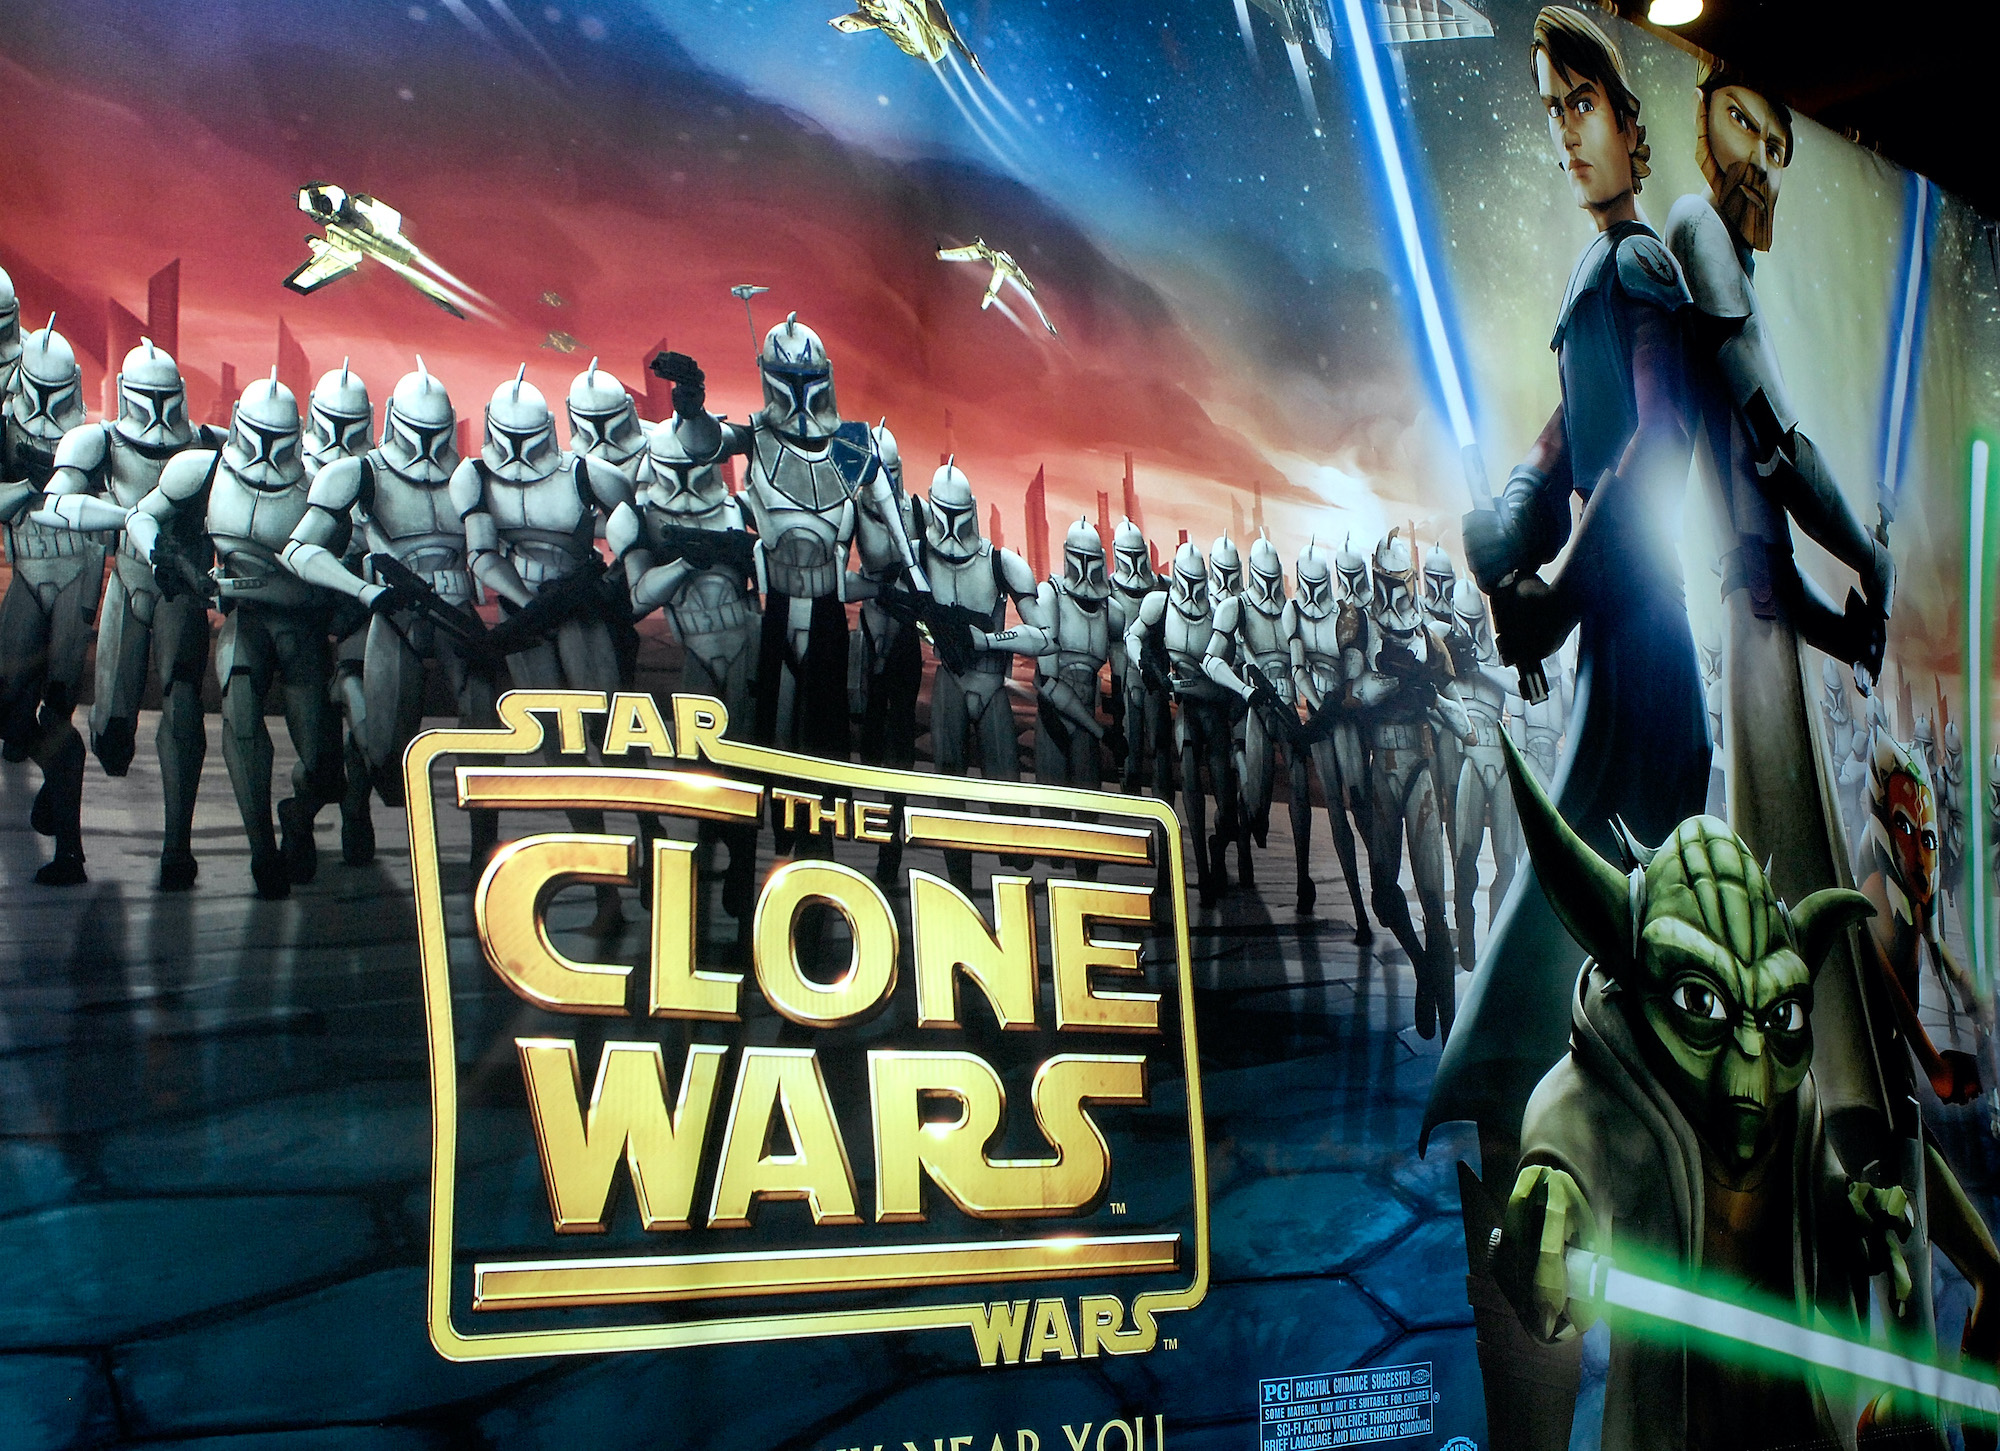 Special screening of "Star Wars: The Clone Wars" 